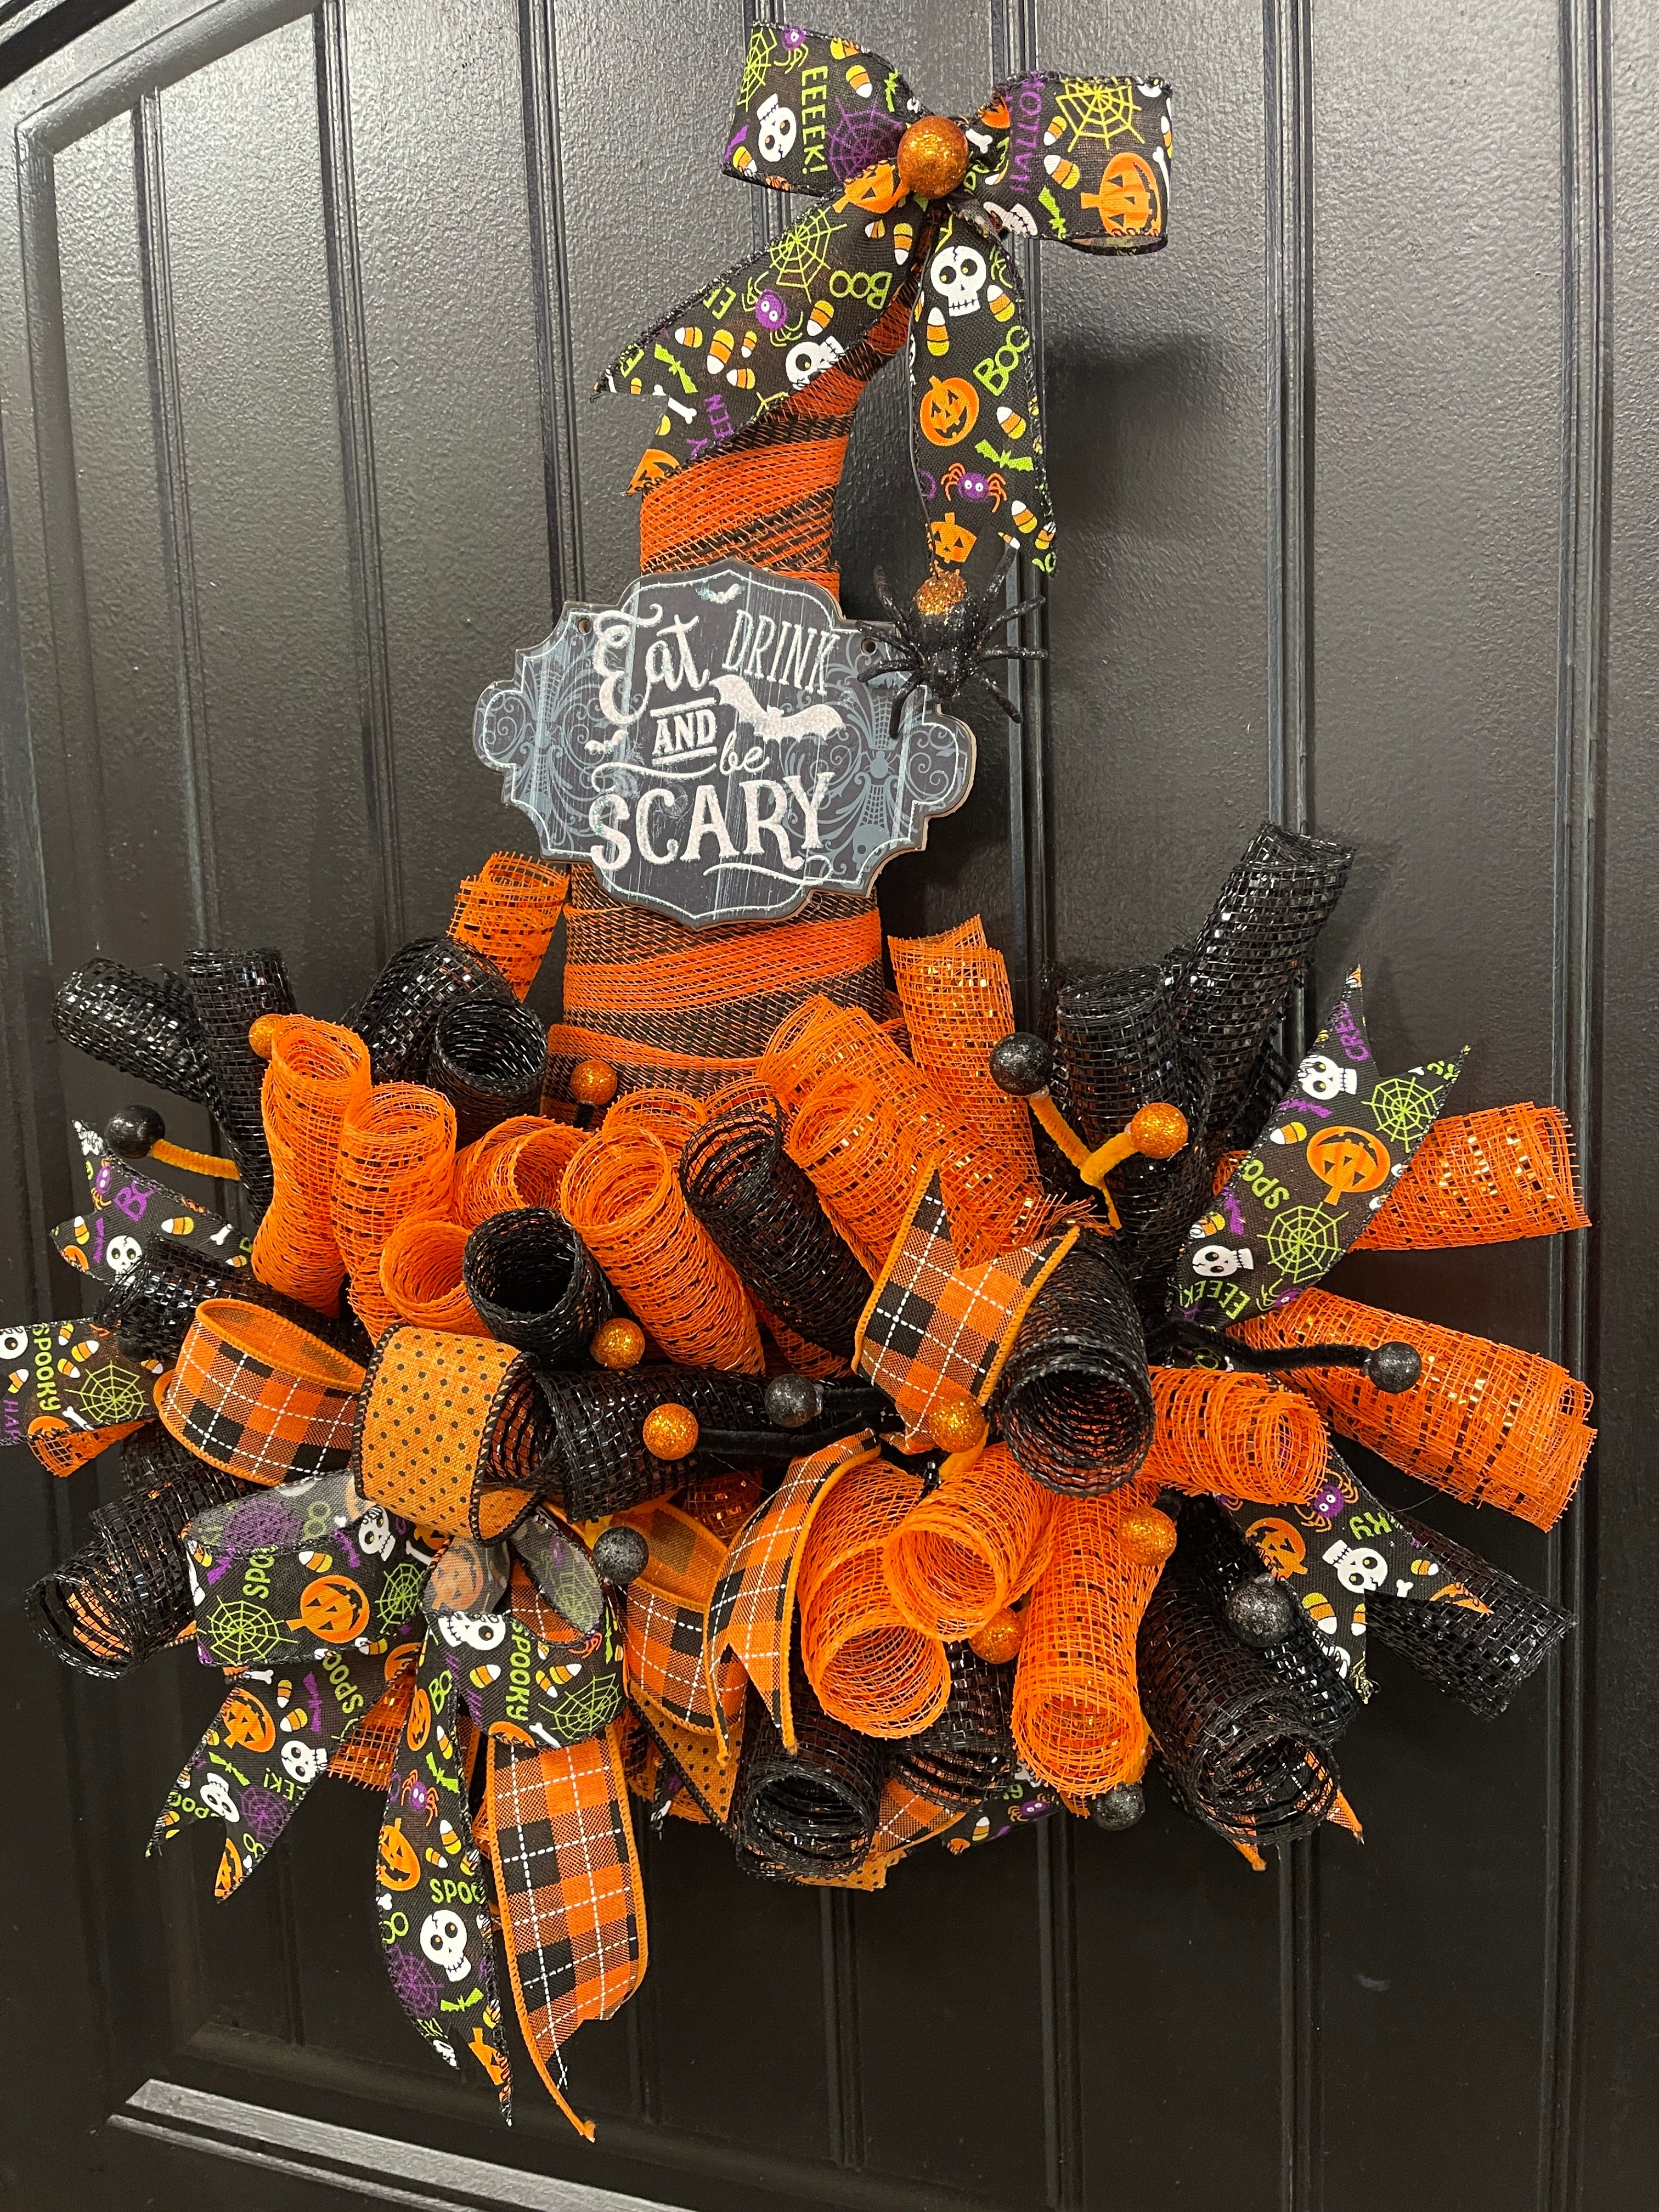 Halloween Witch Hat Wreath, Eat Drink and Be Merry by KatsCreationsNMore